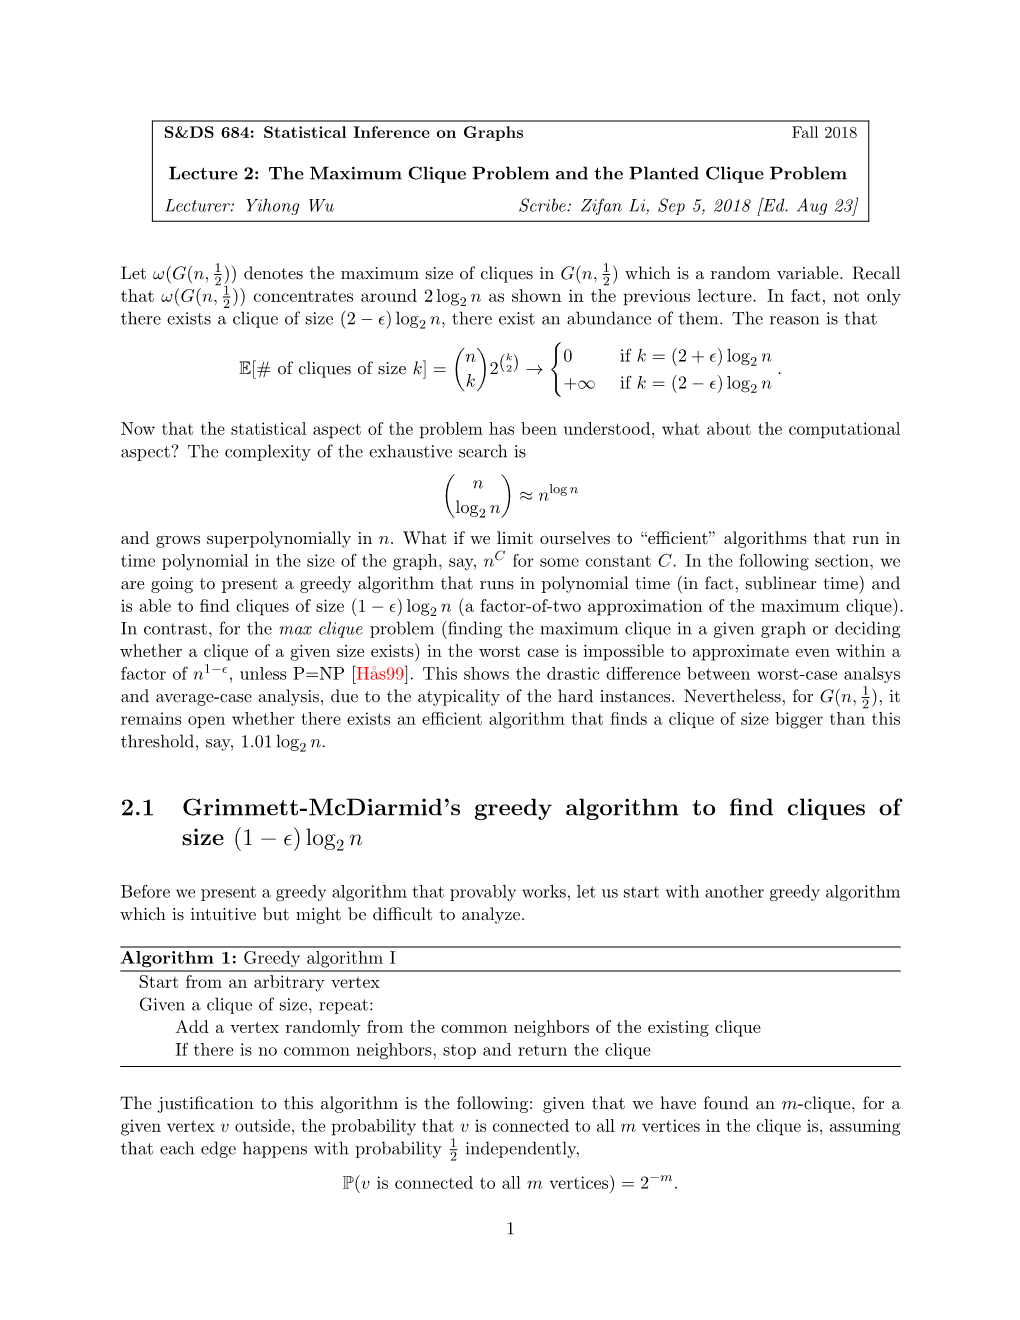 2.1 Grimmett-Mcdiarmid's Greedy Algorithm to Find Cliques of Size